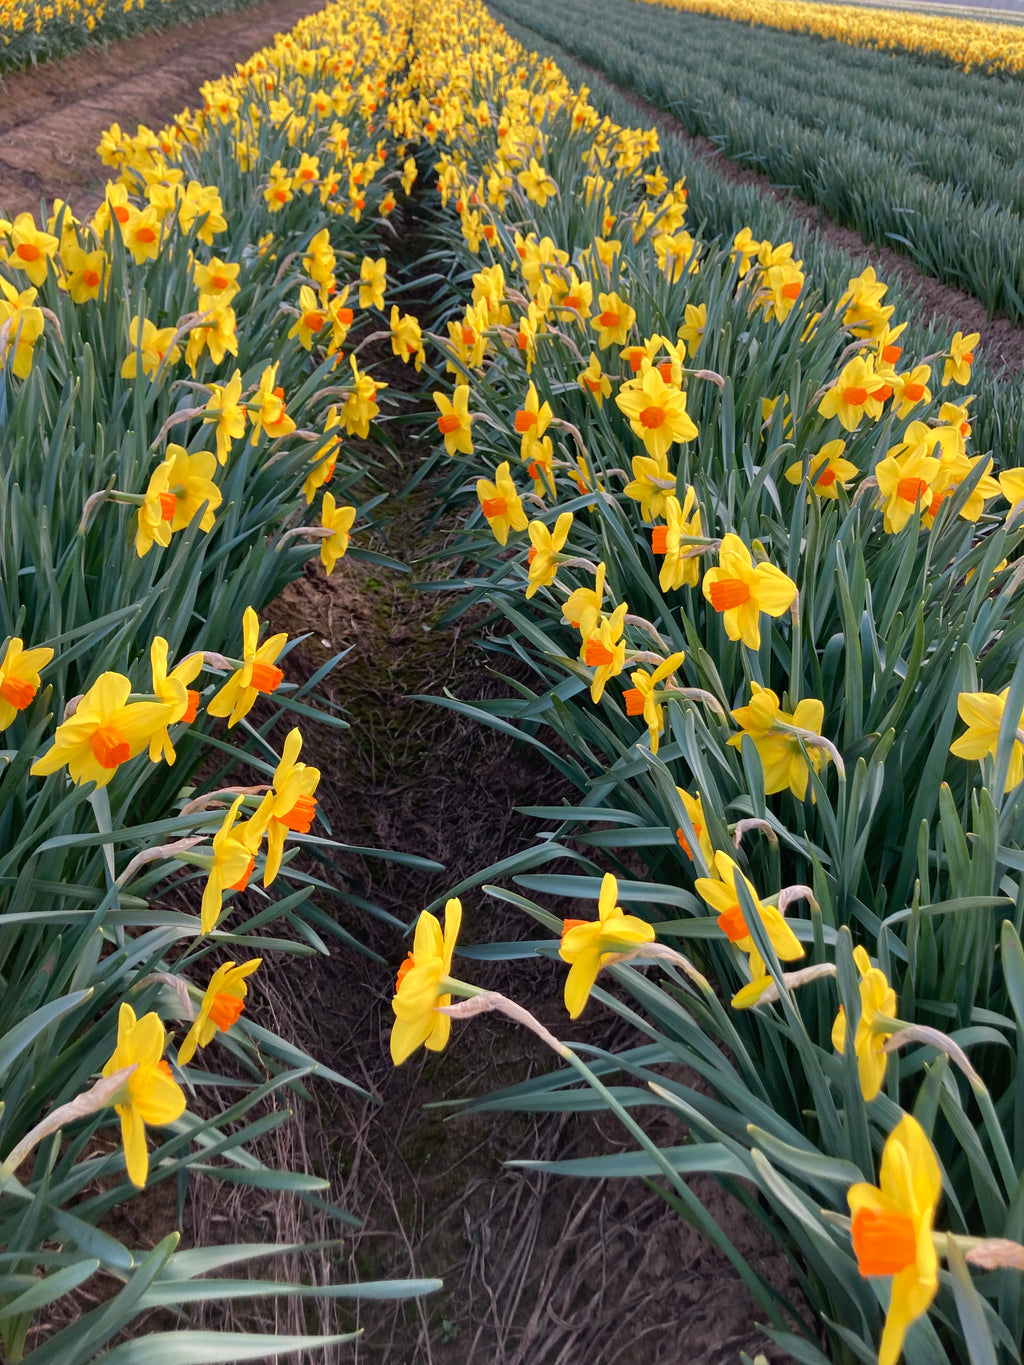 Daffodil 'Sealing Wax' Variety (Bulbs To Plant Yourself) Free UK Postage